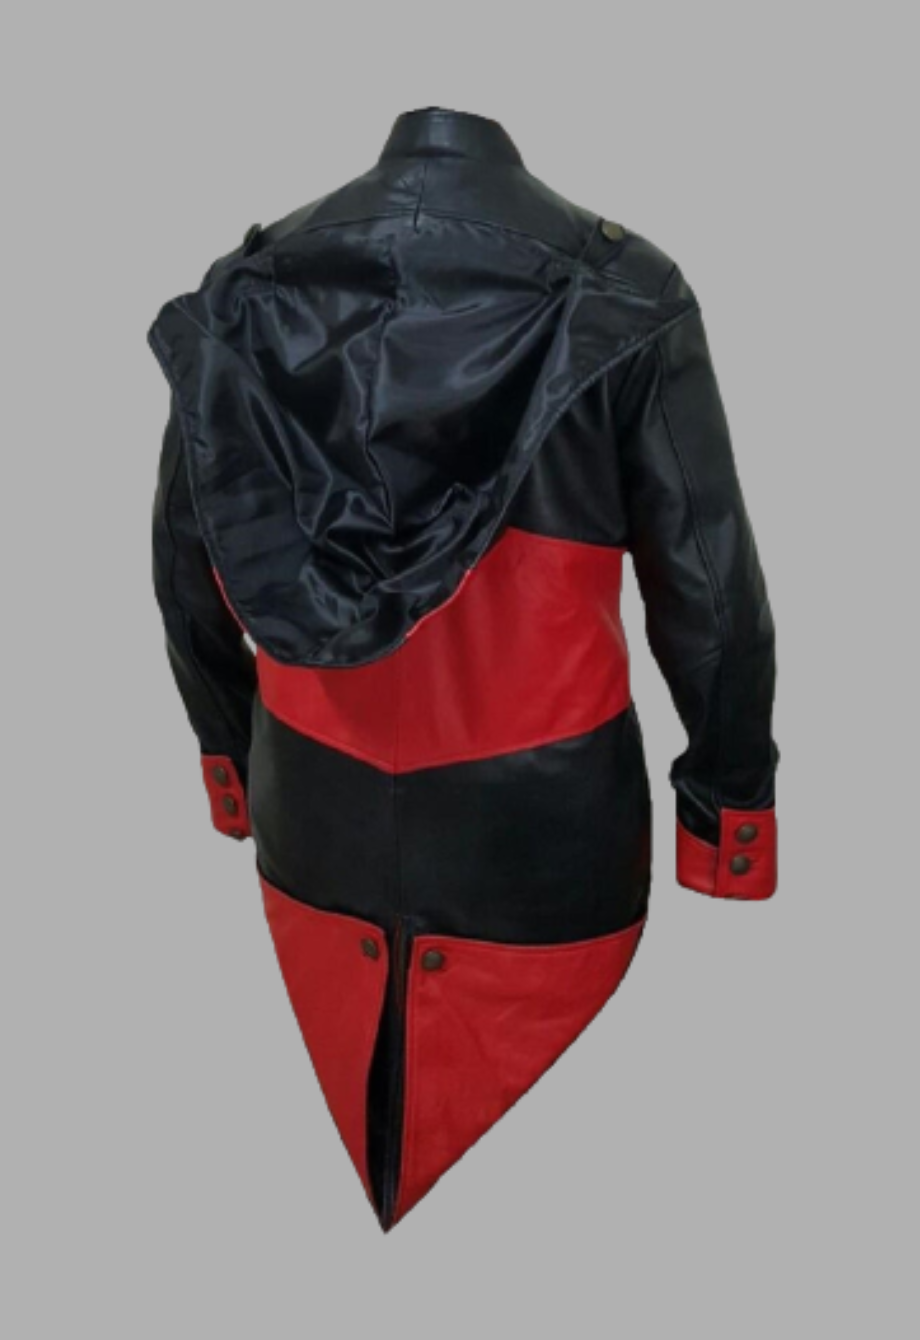 Mens Black and Red Removable Hoodie Creed Leather Coat Jacket